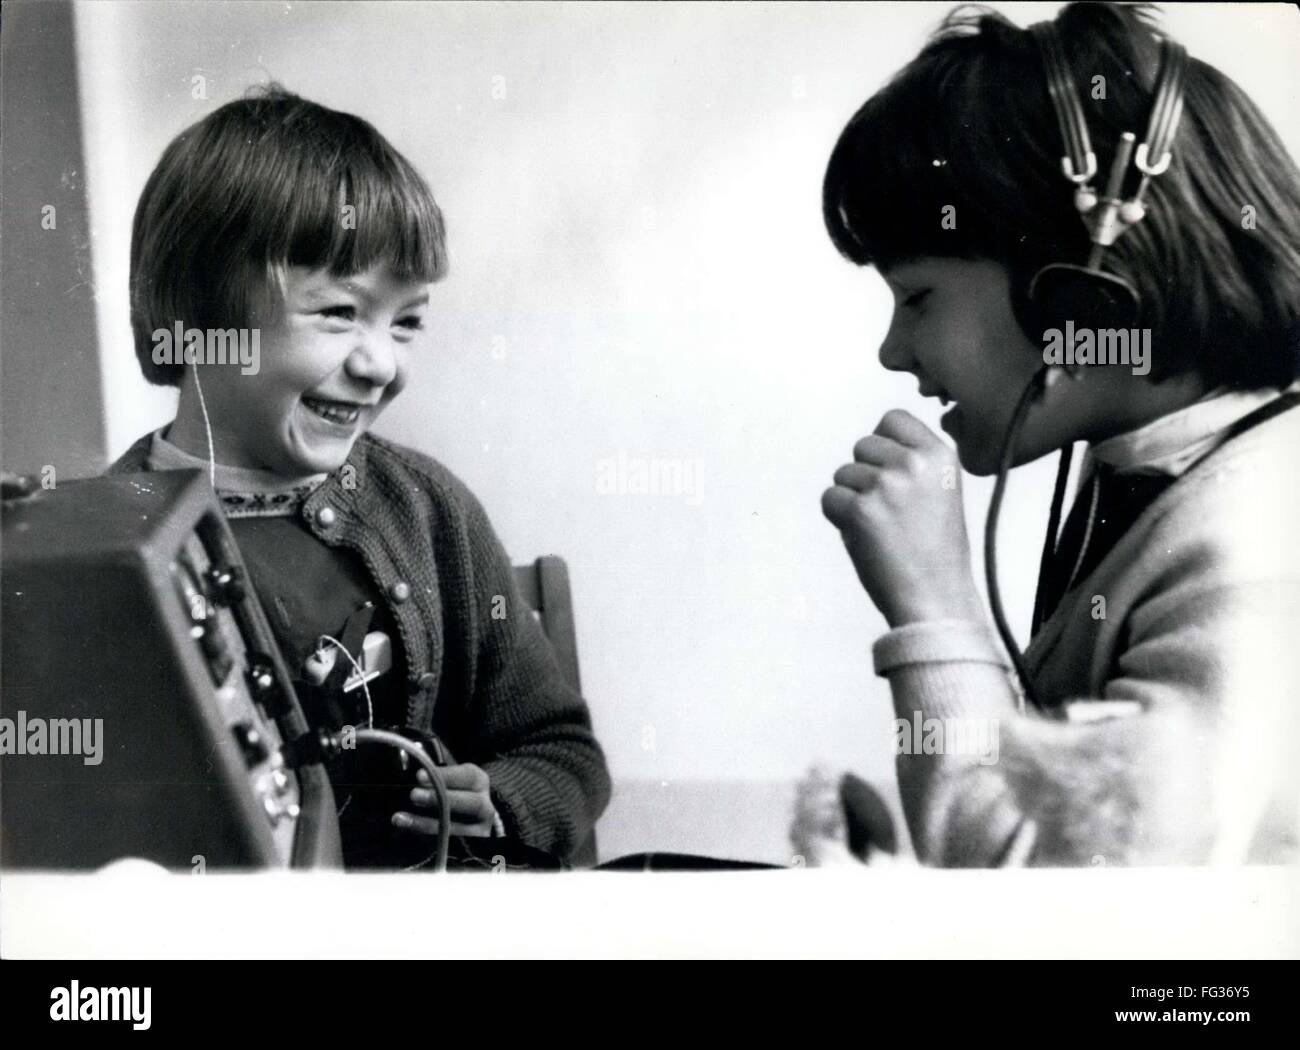 1973 - audio headphones music children learn school - Conversation. Talking to each other via head phones and microphones is Sharon Martin, 6 and her girl friend, Anita Taylor, 8. Anita talks to Sharon, on one of the rare occasions where one child hears the voice of another. © Keystone Pictures USA/ZUMAPRESS.com/Alamy Live News Stock Photo